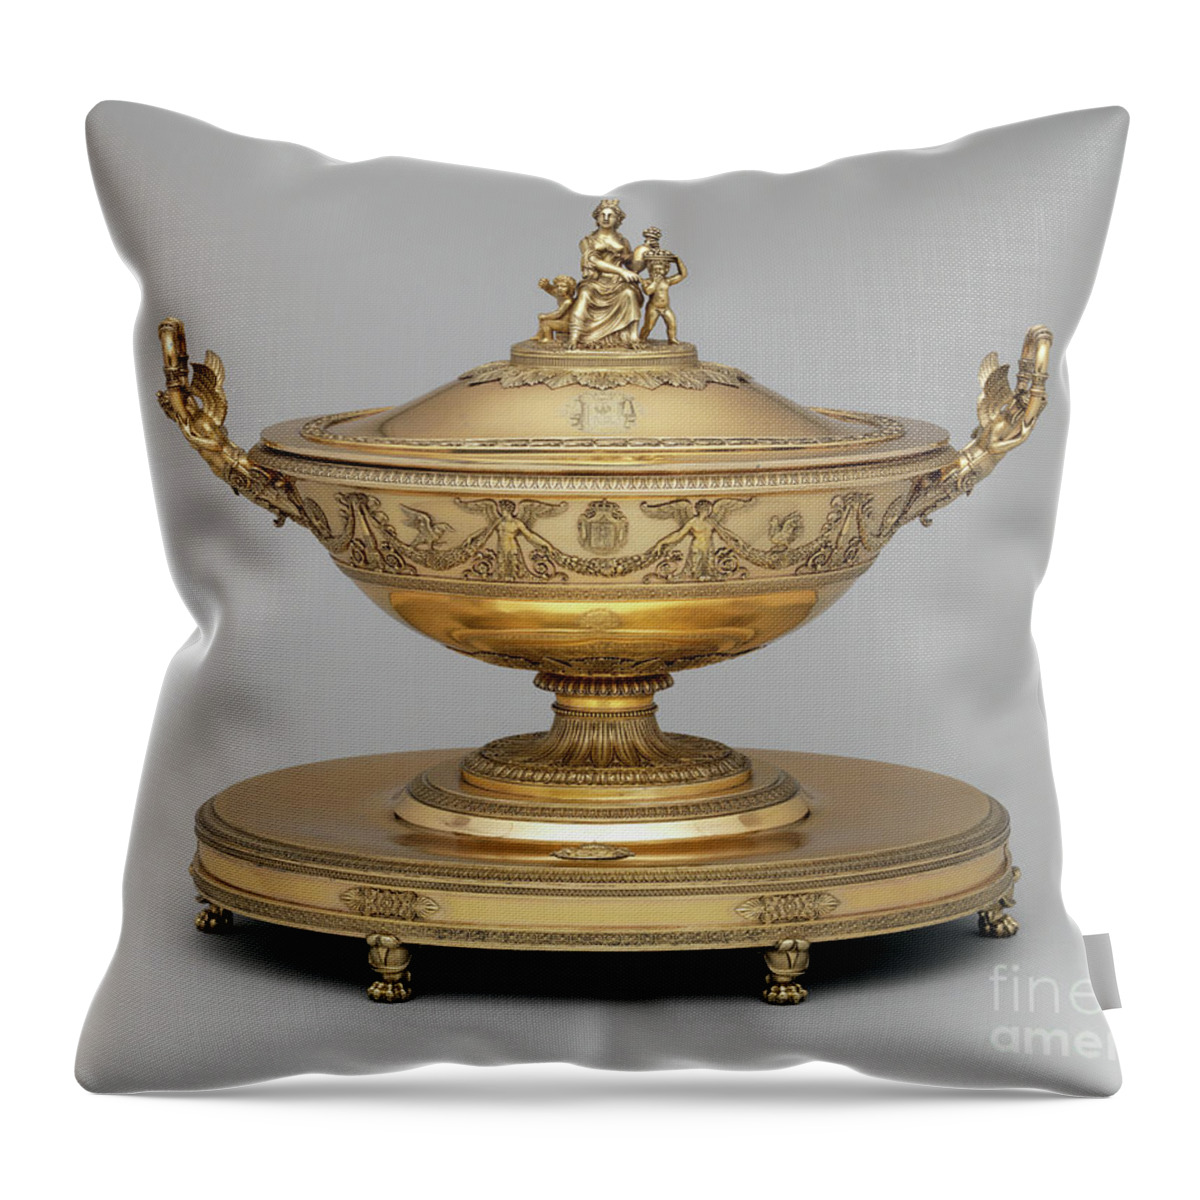 1790s Throw Pillow featuring the photograph Silver Gilt Tureen by Granger